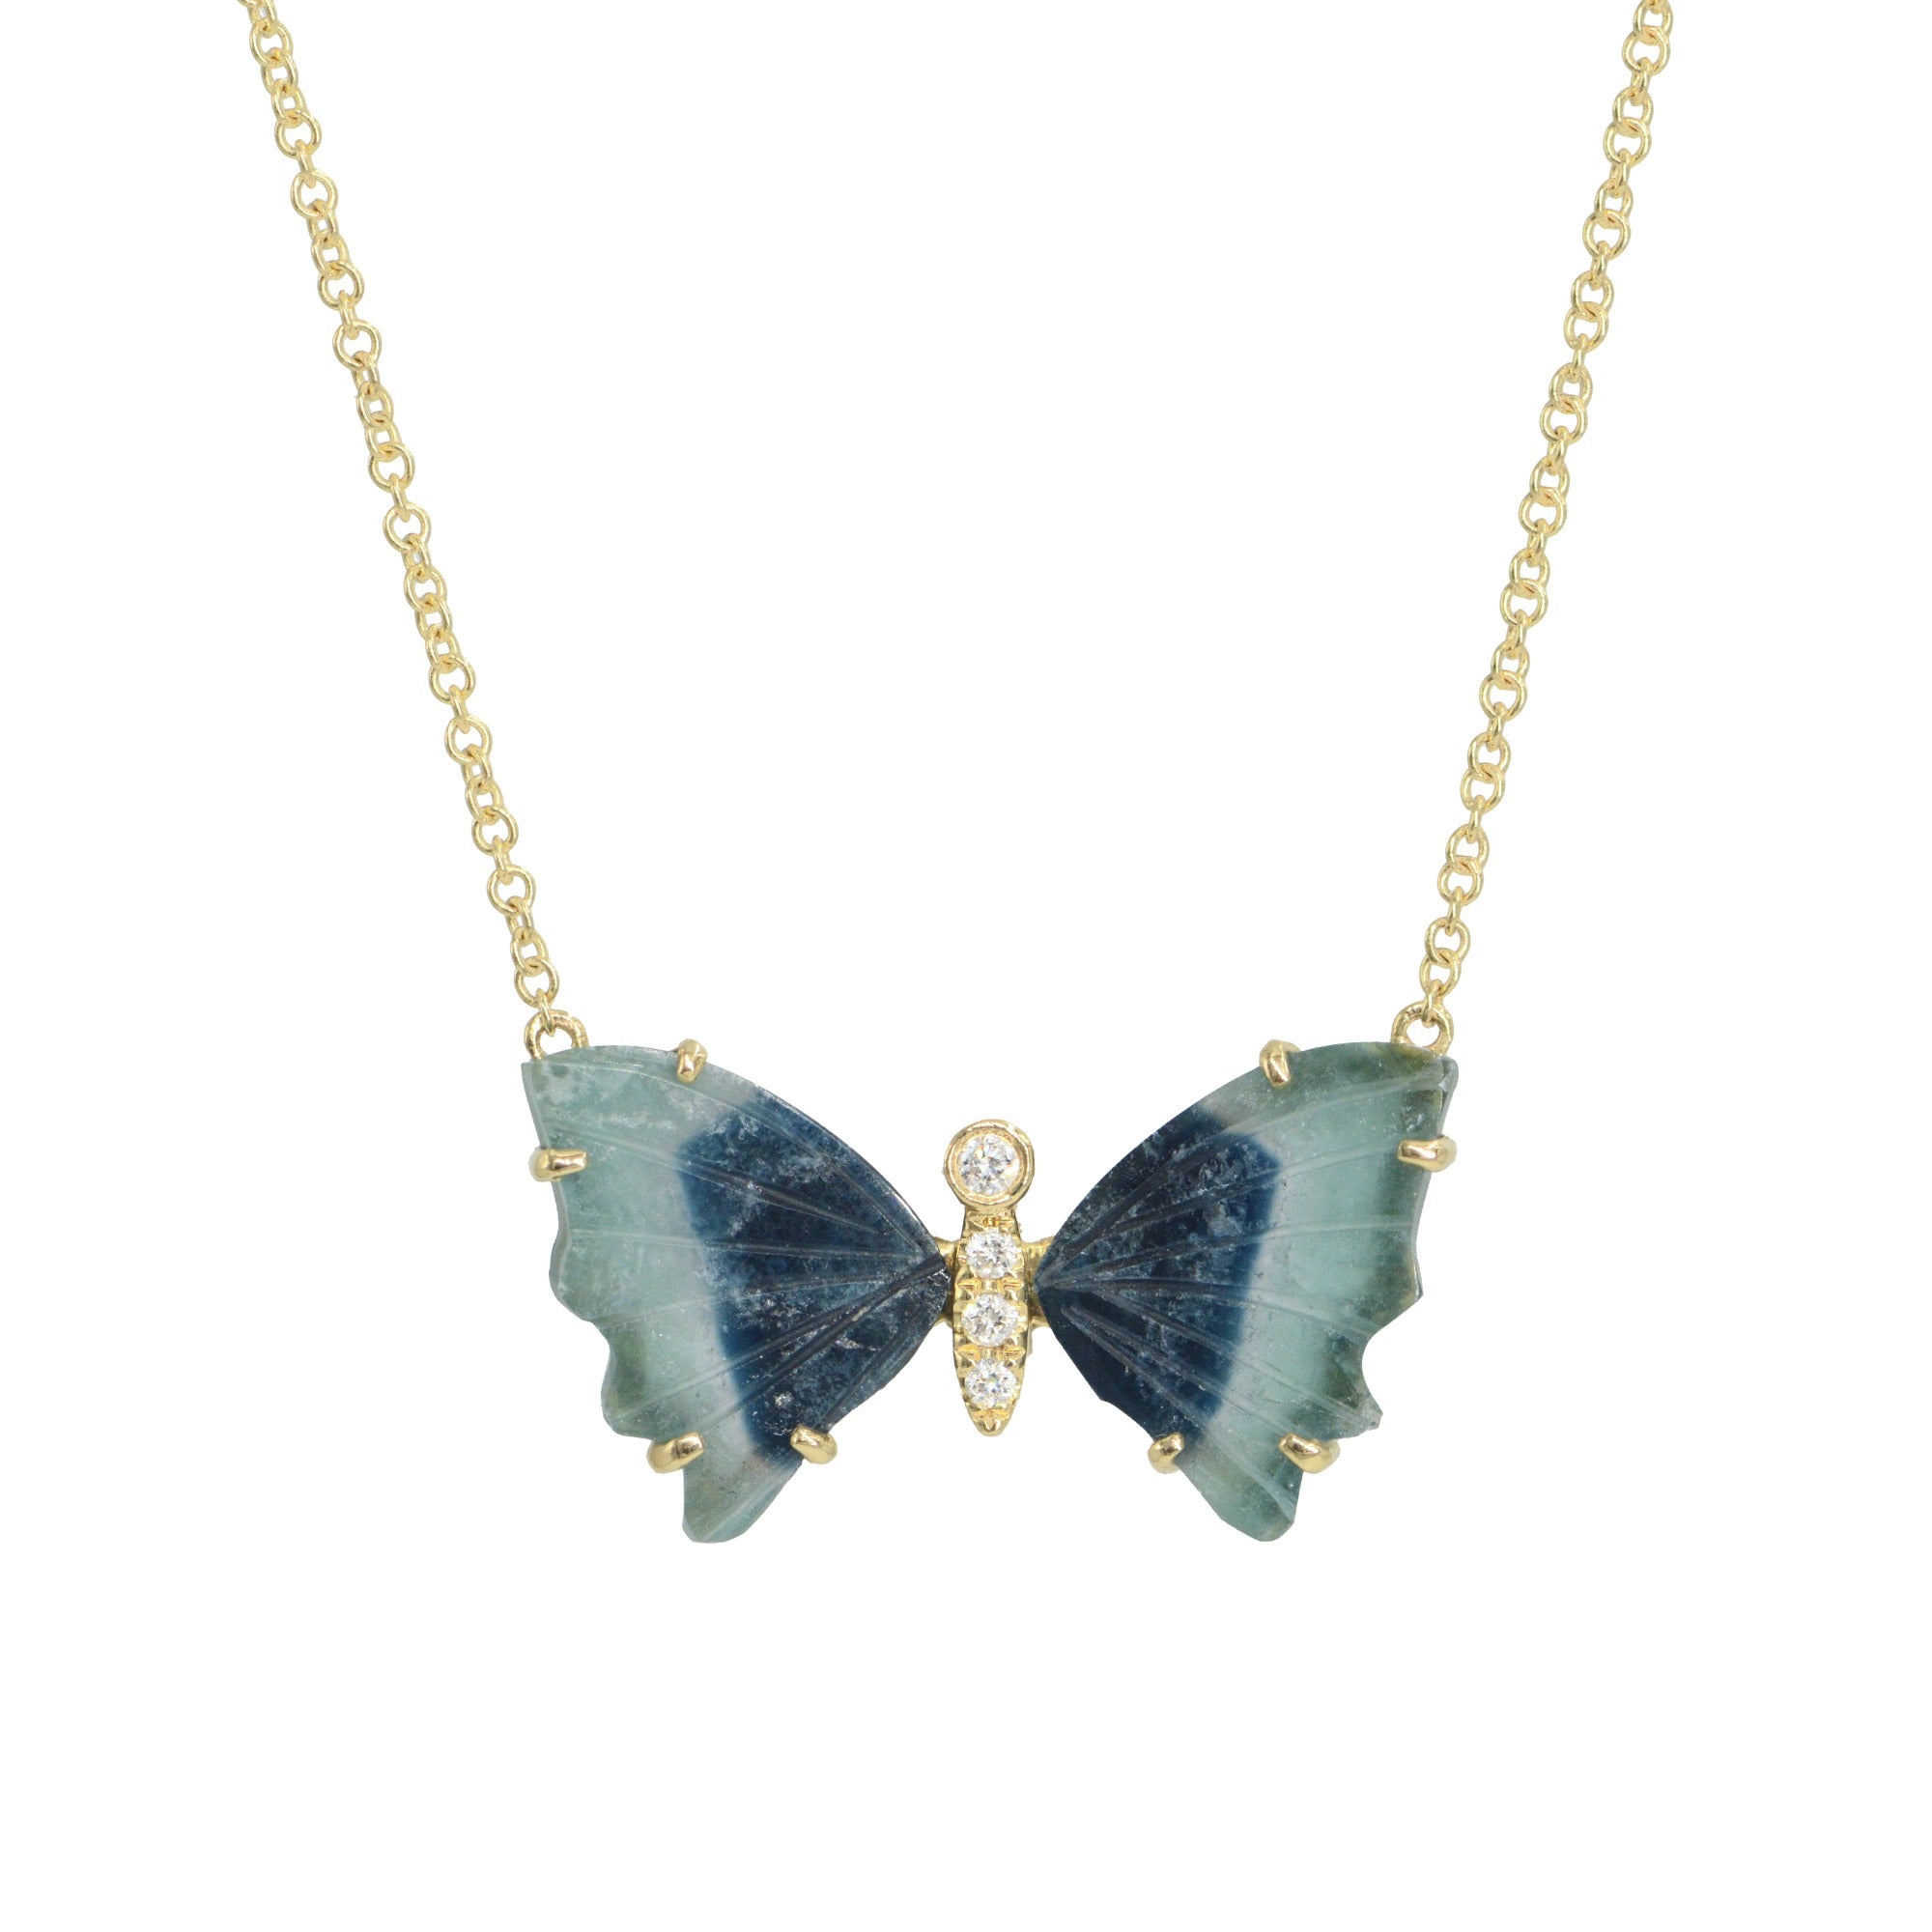 mini blue and navy butterfly necklace with diamonds pronged